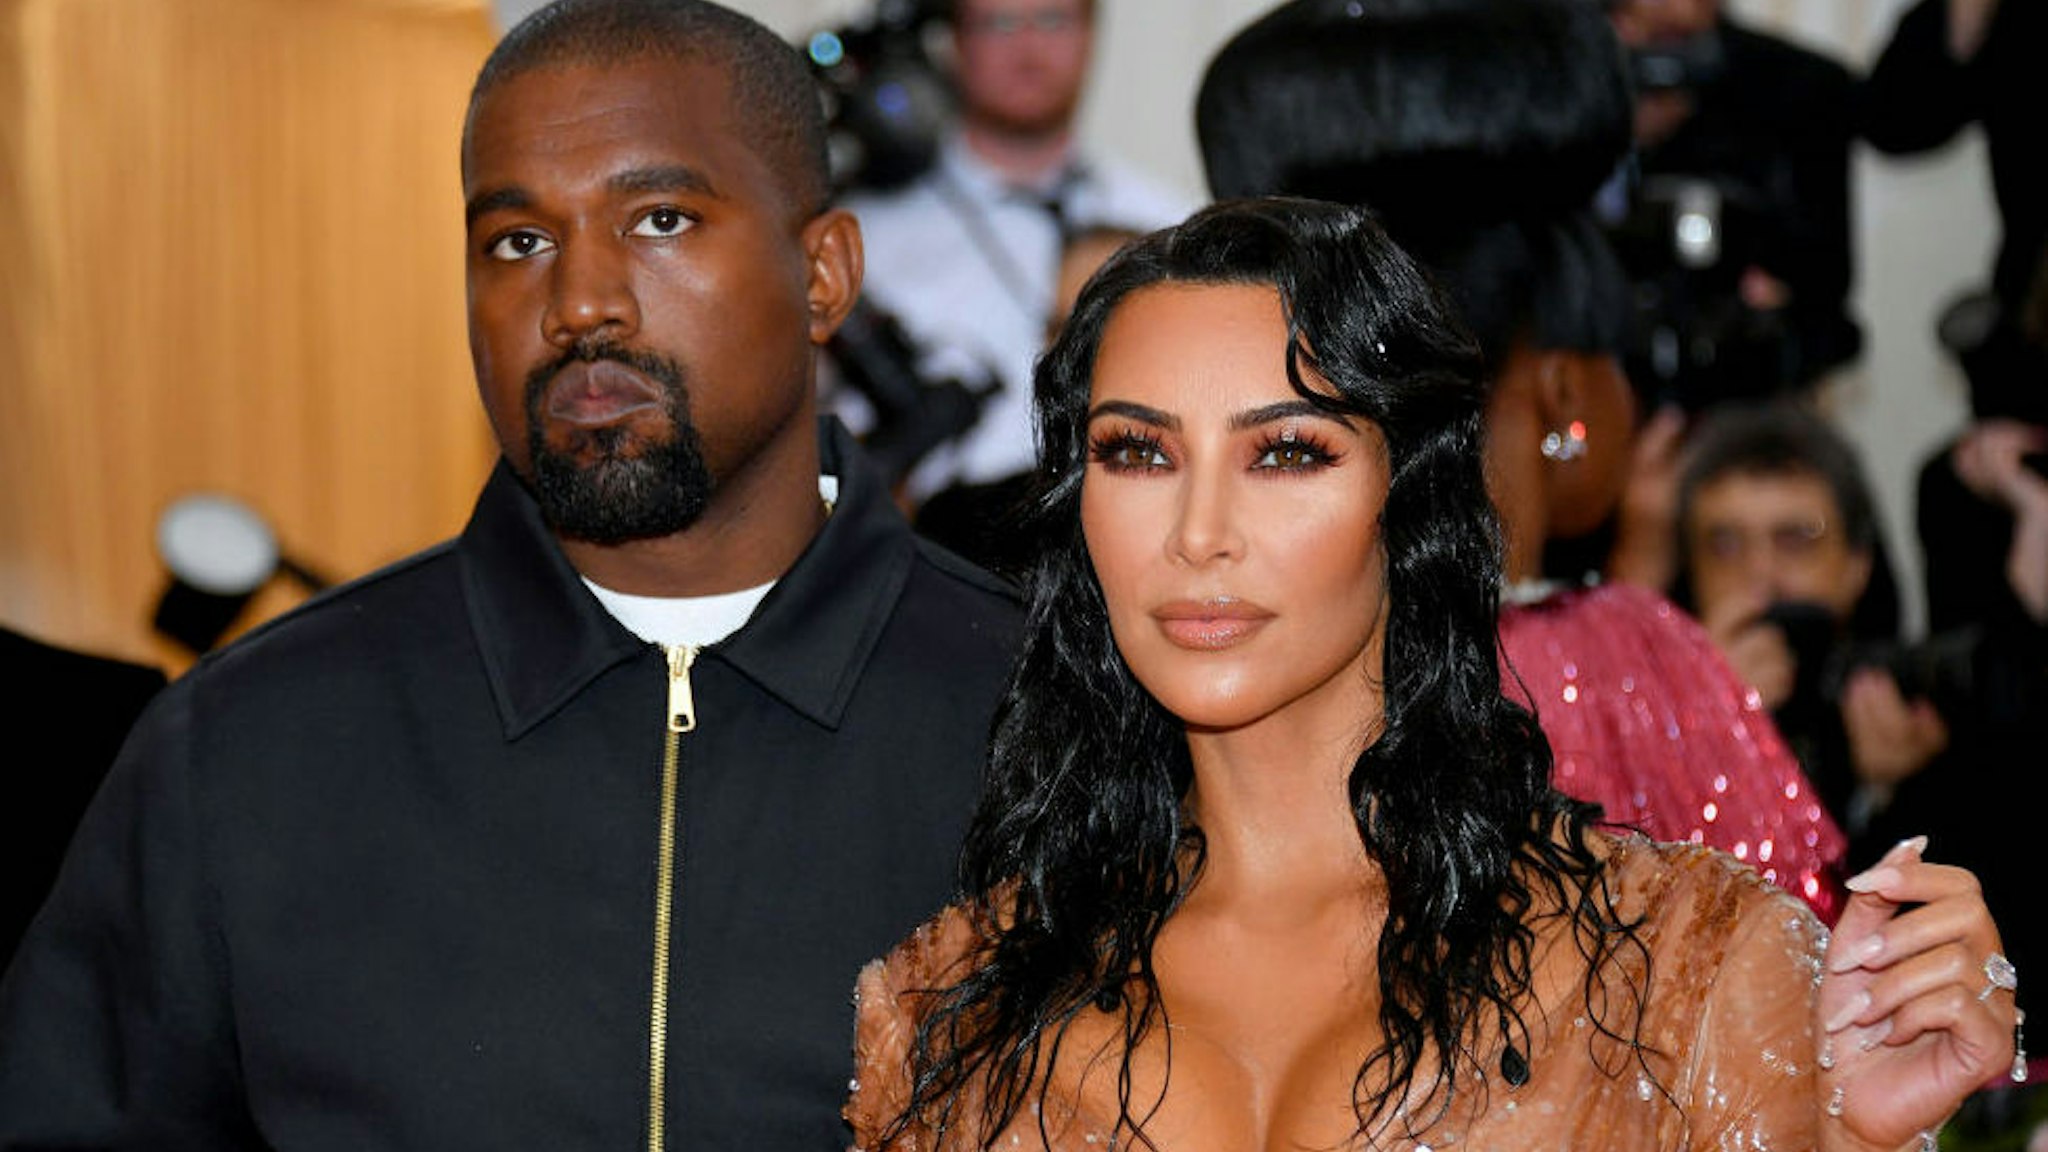 Kim Kardashian West and Kanye West attend The 2019 Met Gala Celebrating Camp: Notes on Fashion at Metropolitan Museum of Art on May 06, 2019 in New York City. (